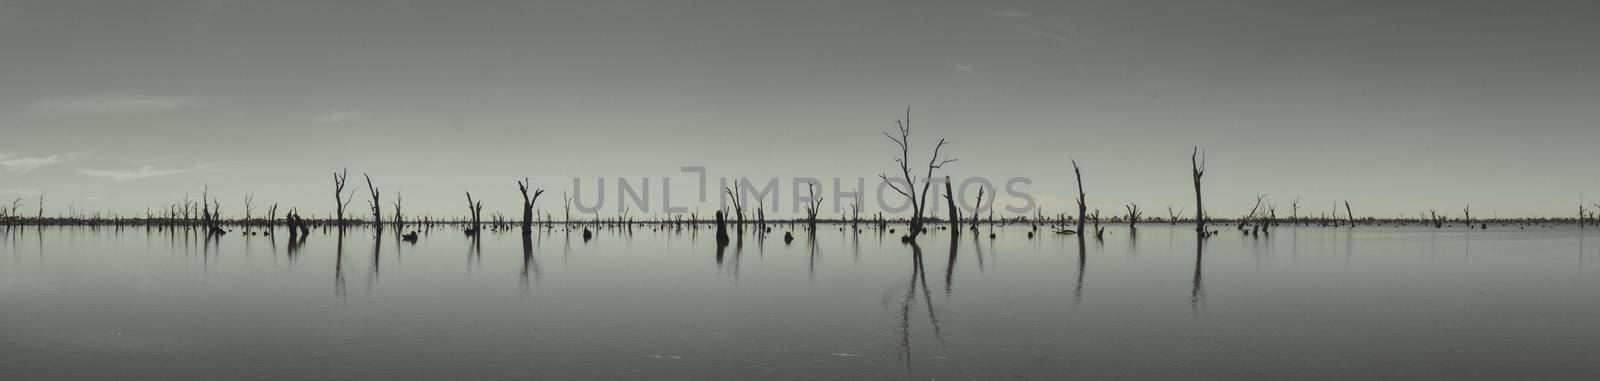 Photograph of dead tree trunks sticking out of the water, Australia by bettercallcurry